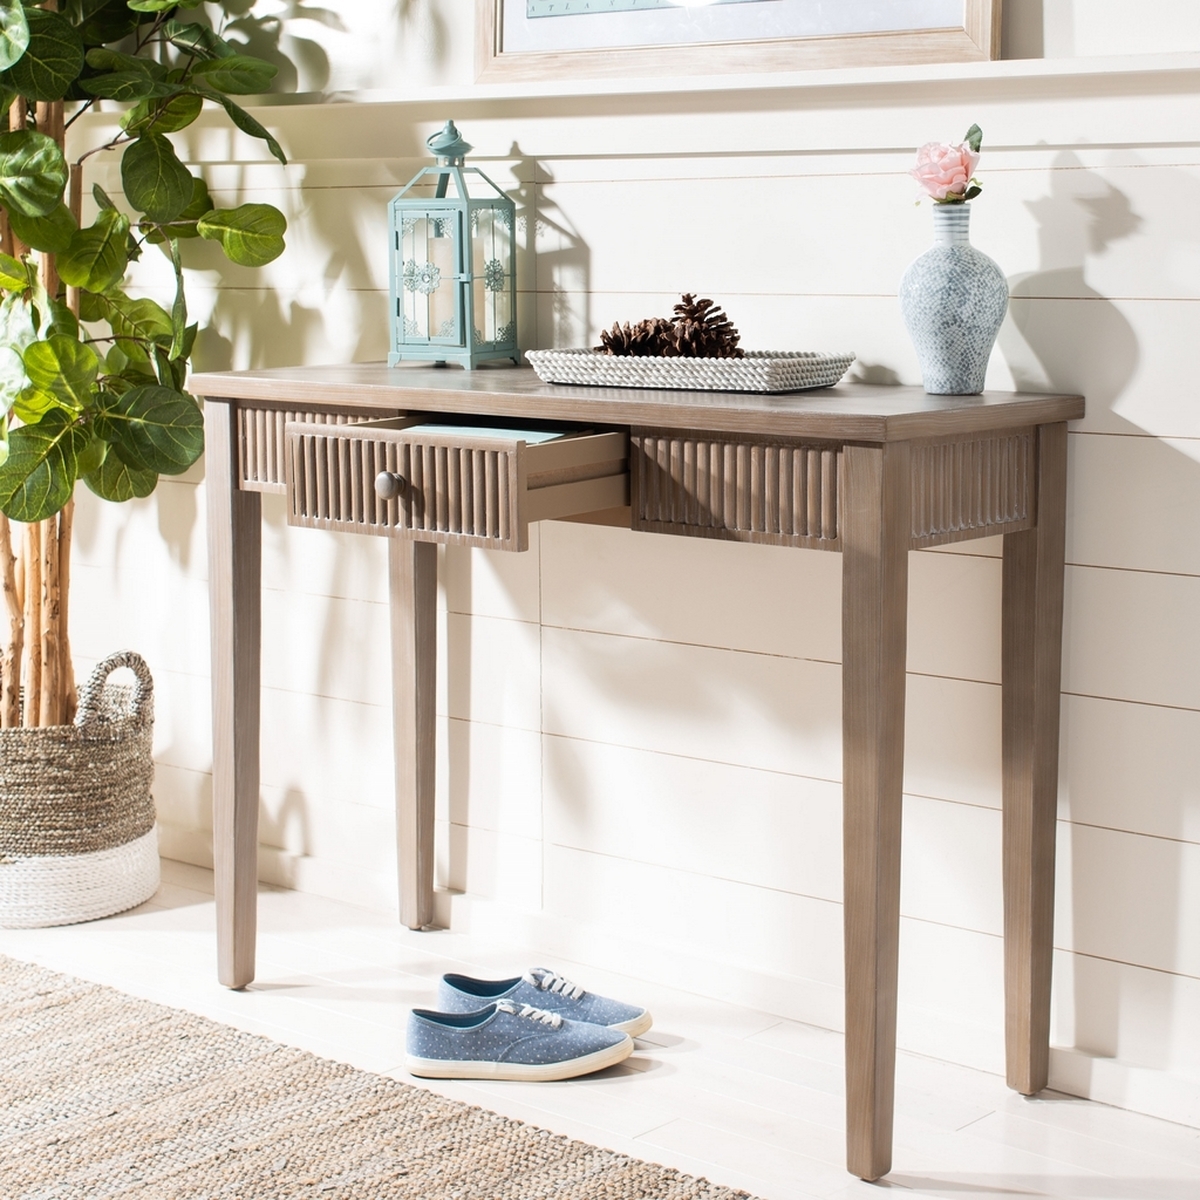 Beale Console With Storage Drawer - Grey - Safavieh - Image 2